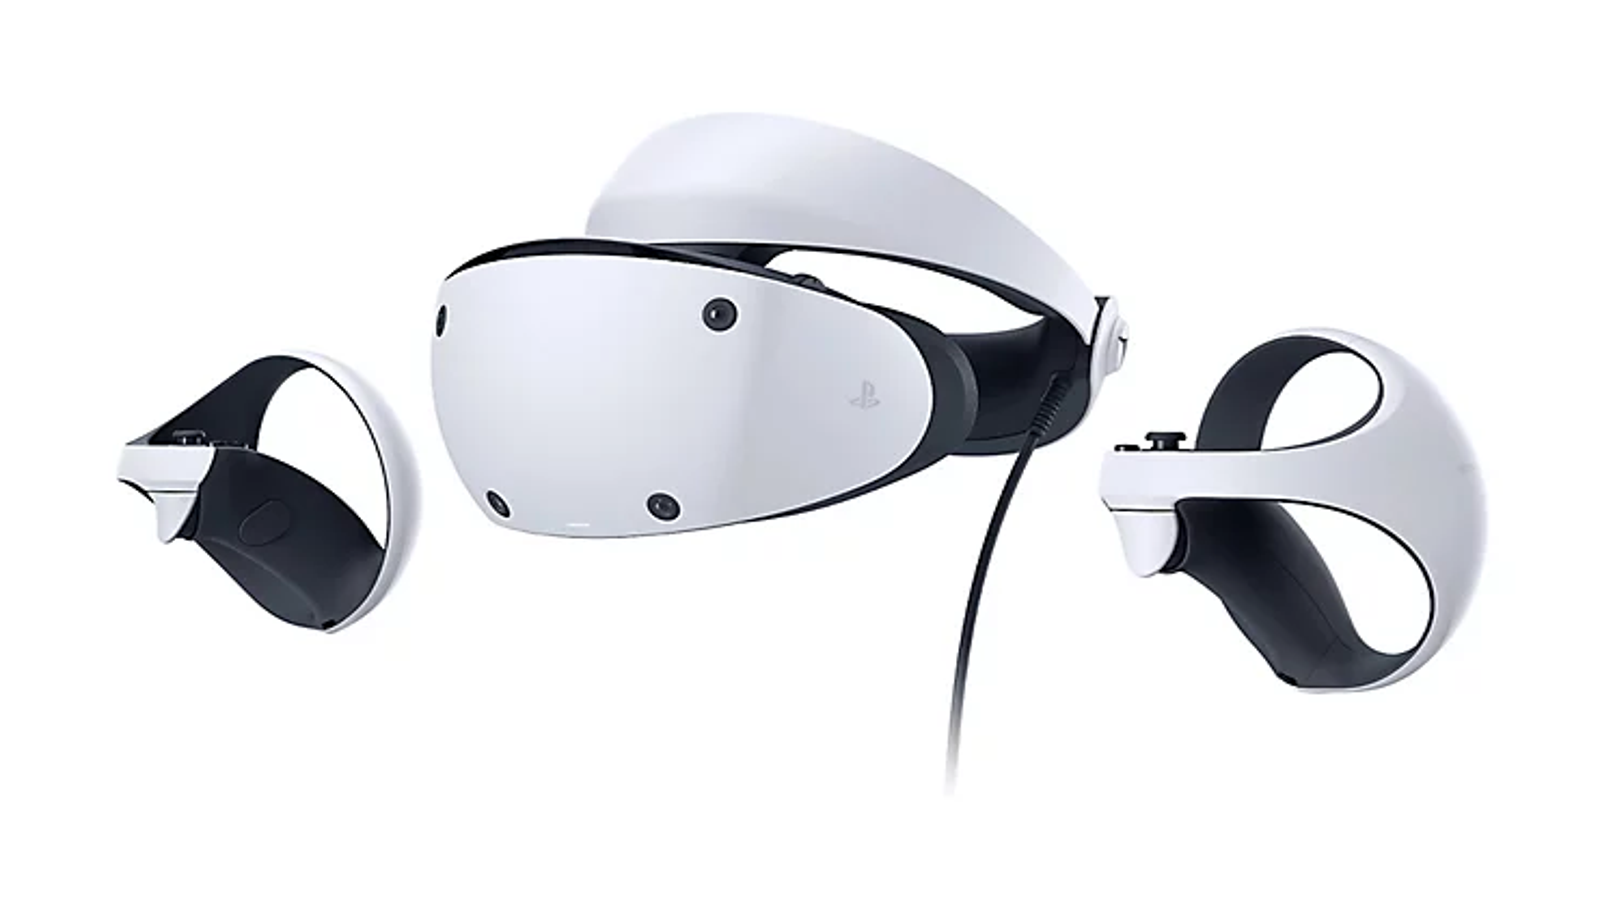 Sony: We have not cut PSVR 2 production numbers | GamesIndustry.biz